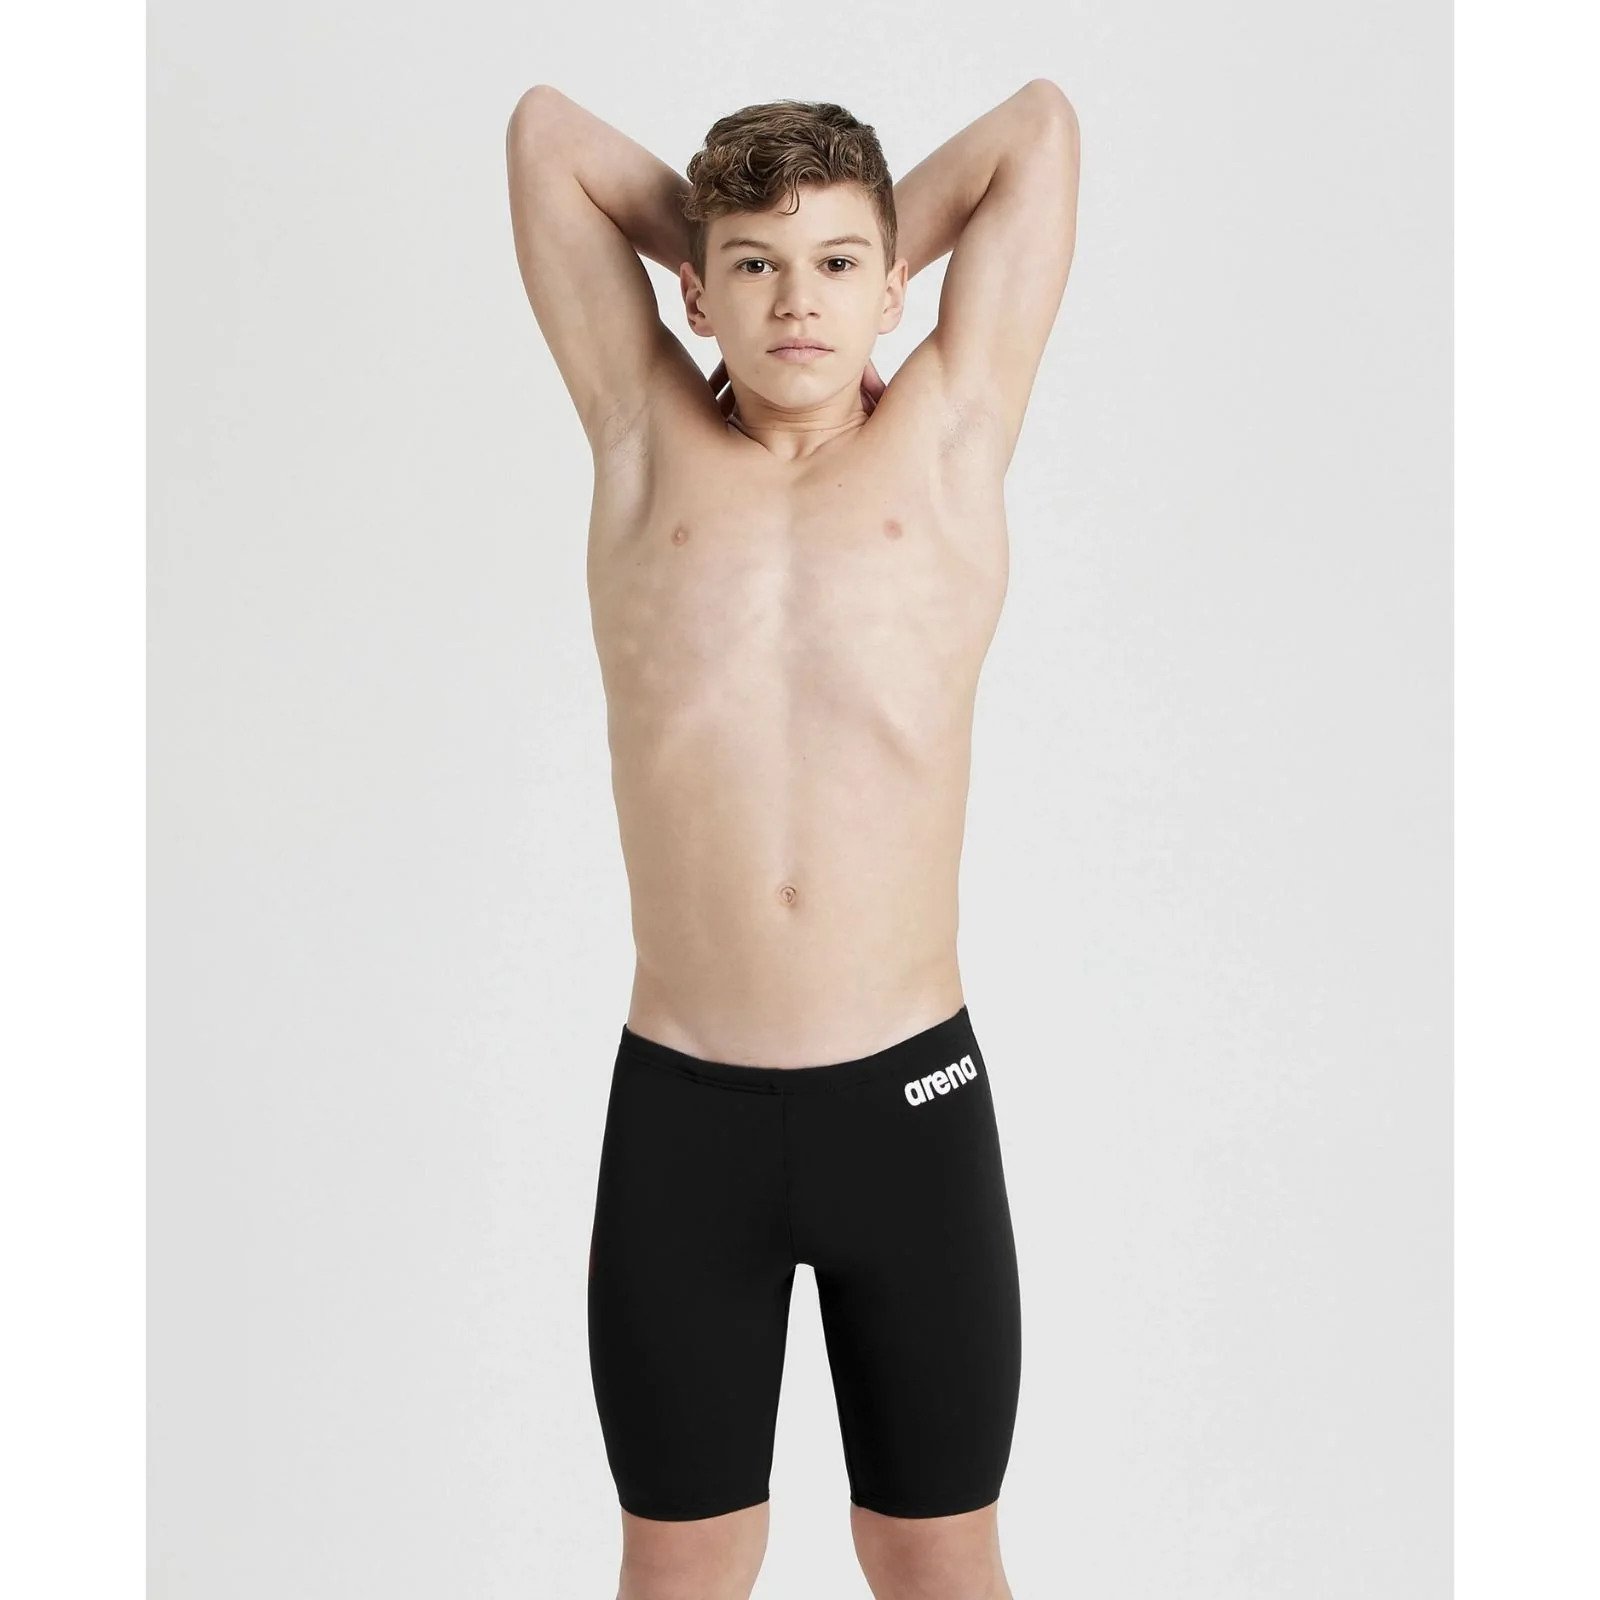 BOYS ARENA Jammer Style Training Suit